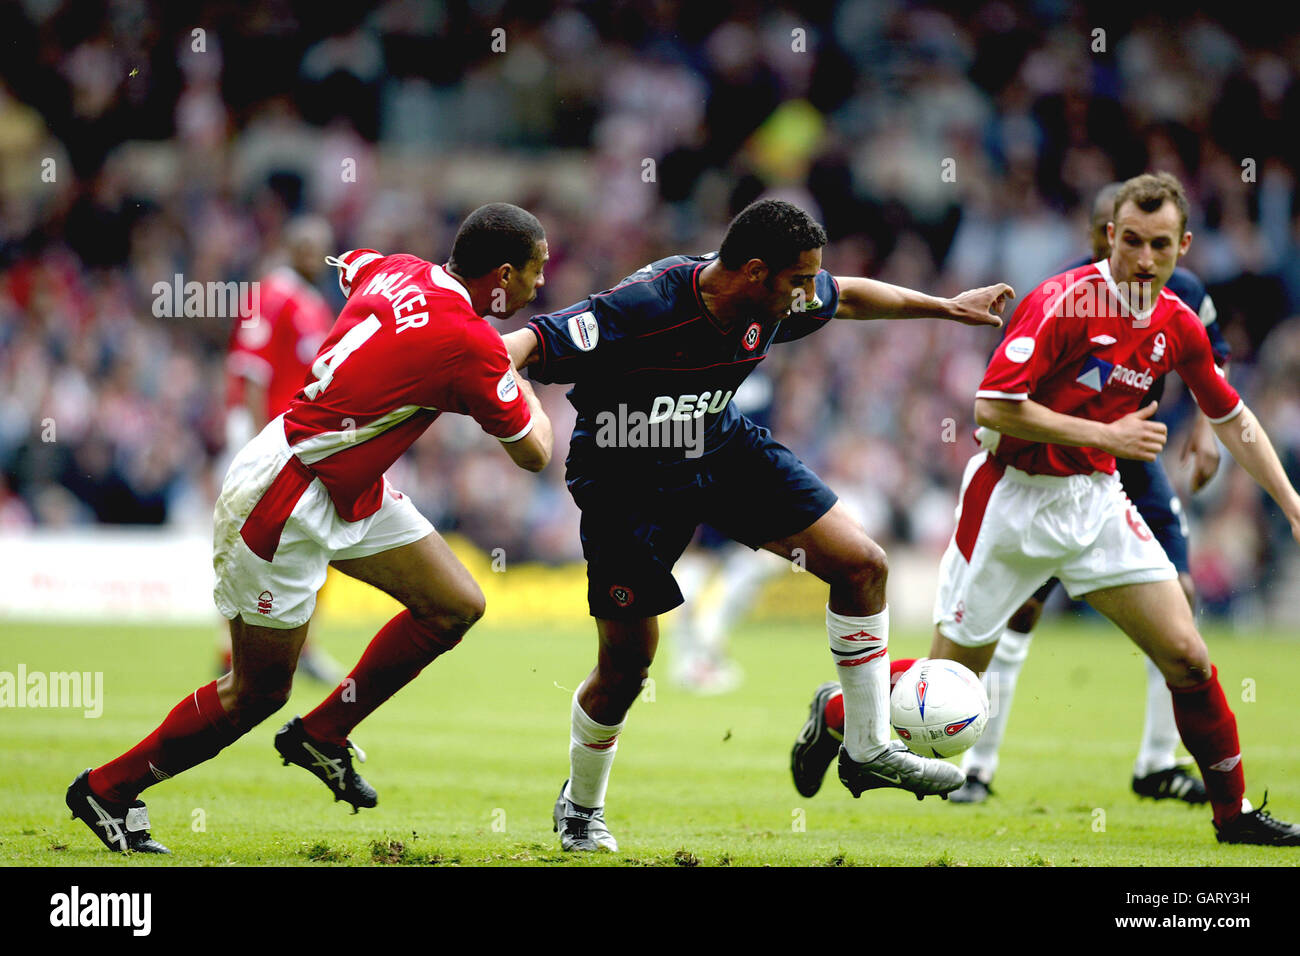 Soccer - Nationwide League Division One - Play-off Semi Final - First Leg - Nottingham Forest v Sheffield United. Nottingham Forest's Des Walker and Ricardo Scimeca and Sheffield United's Carl Asaba. Stock Photo